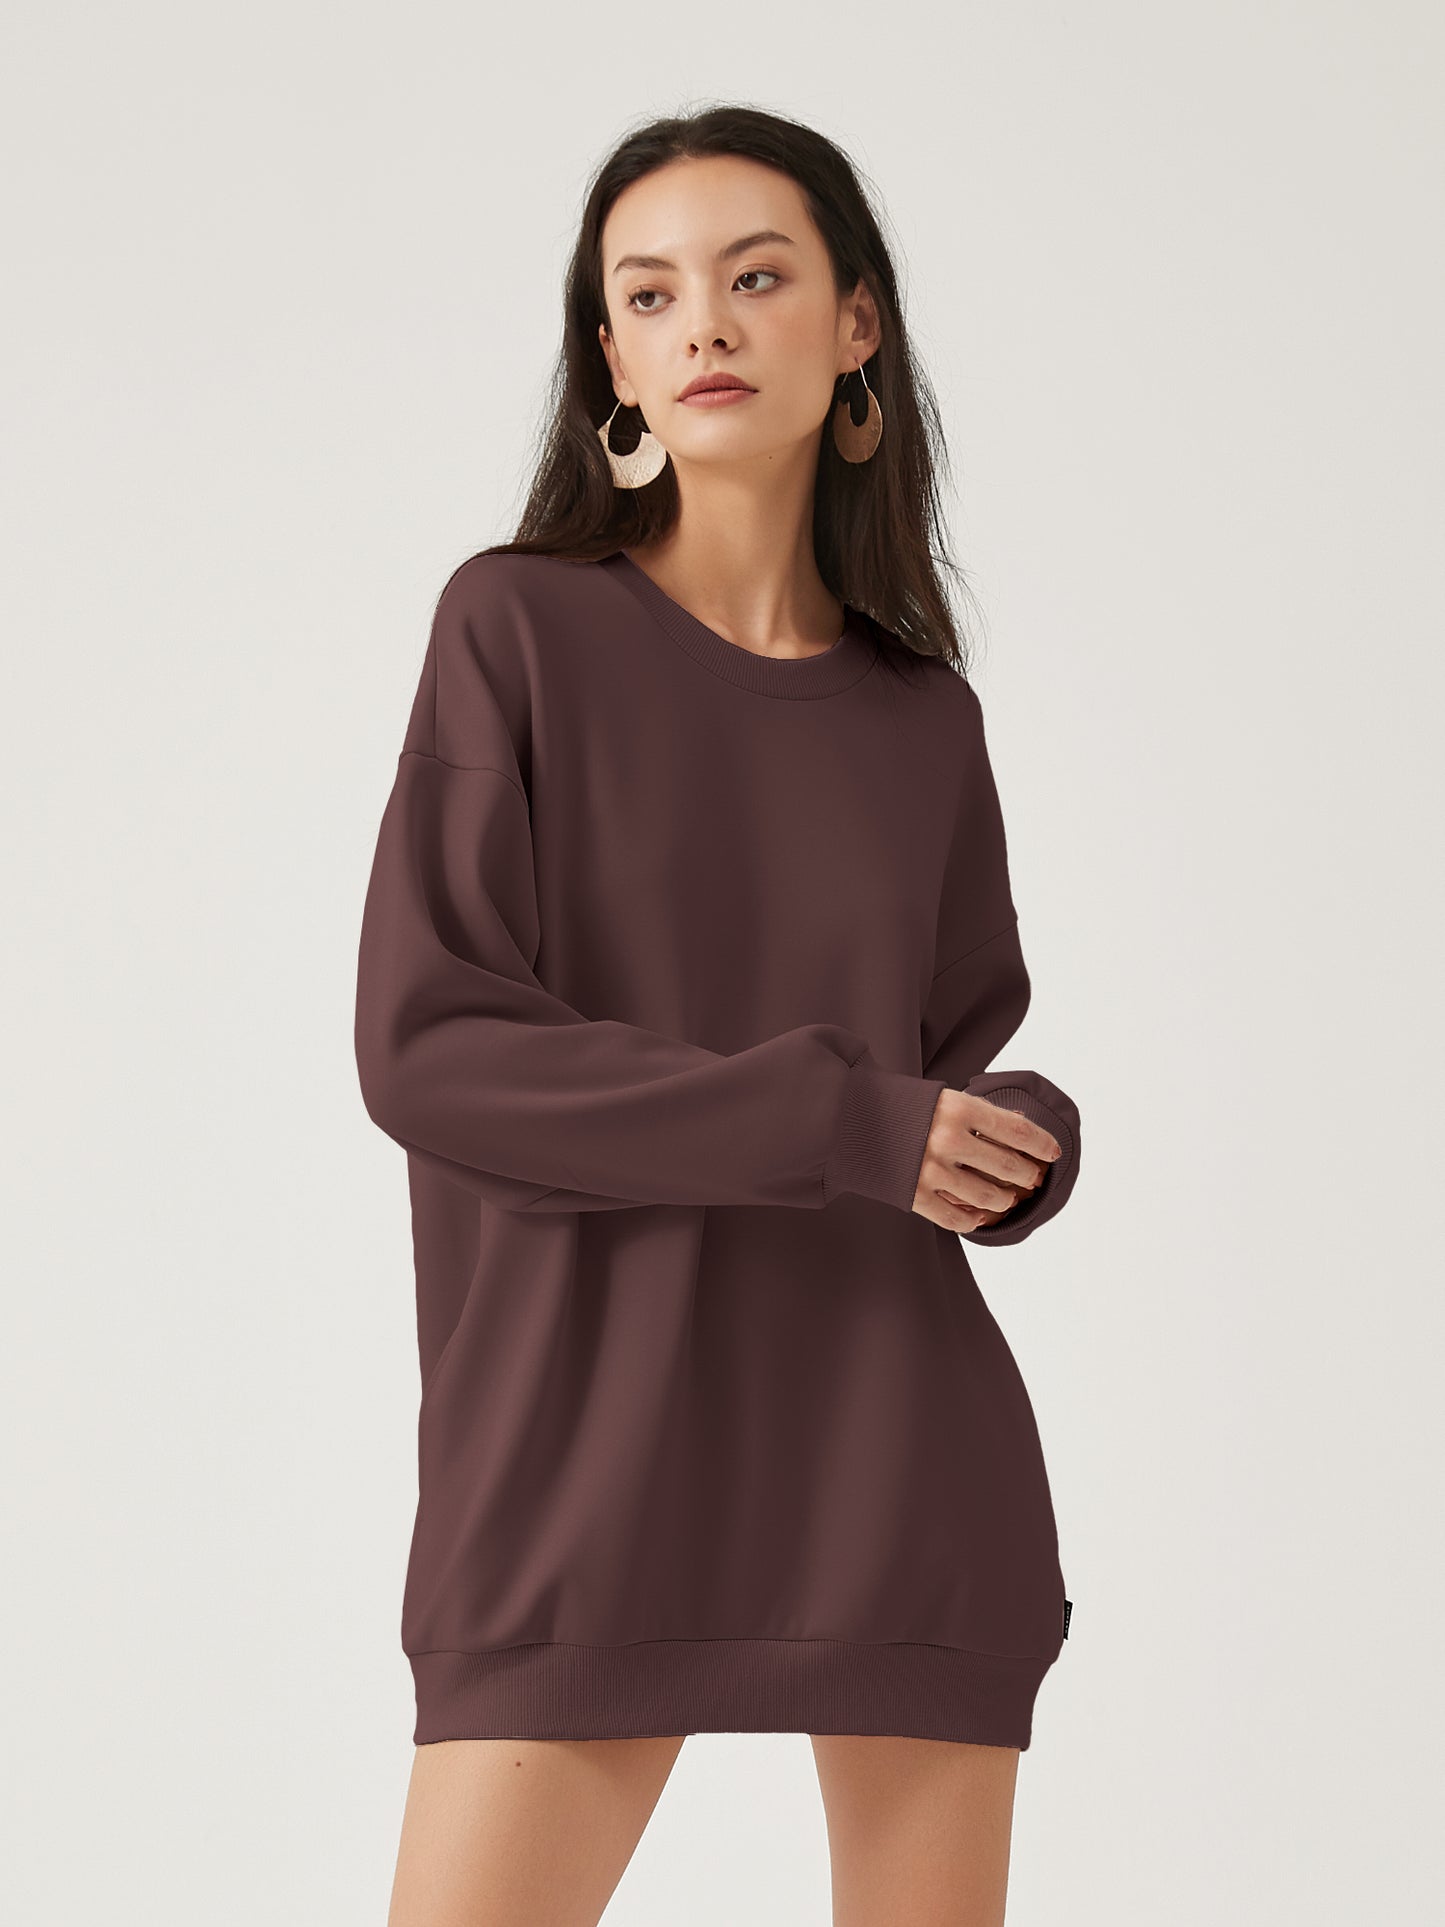 Cubby Sweater, Oversized | New Colors